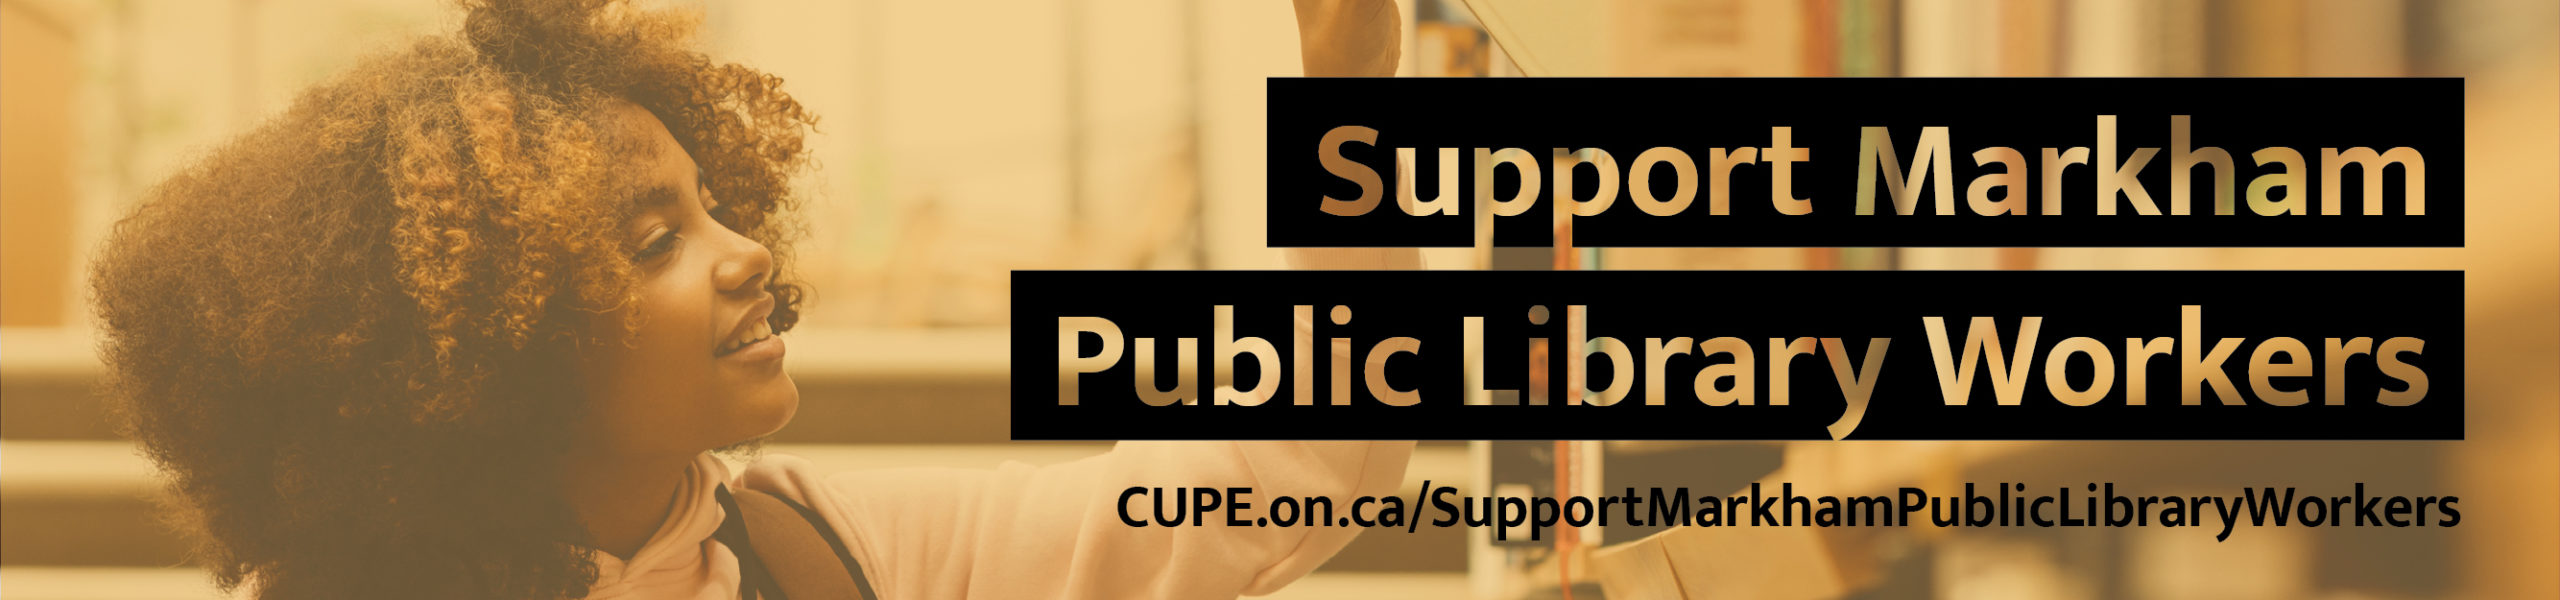 Support Markham Public Library Workers